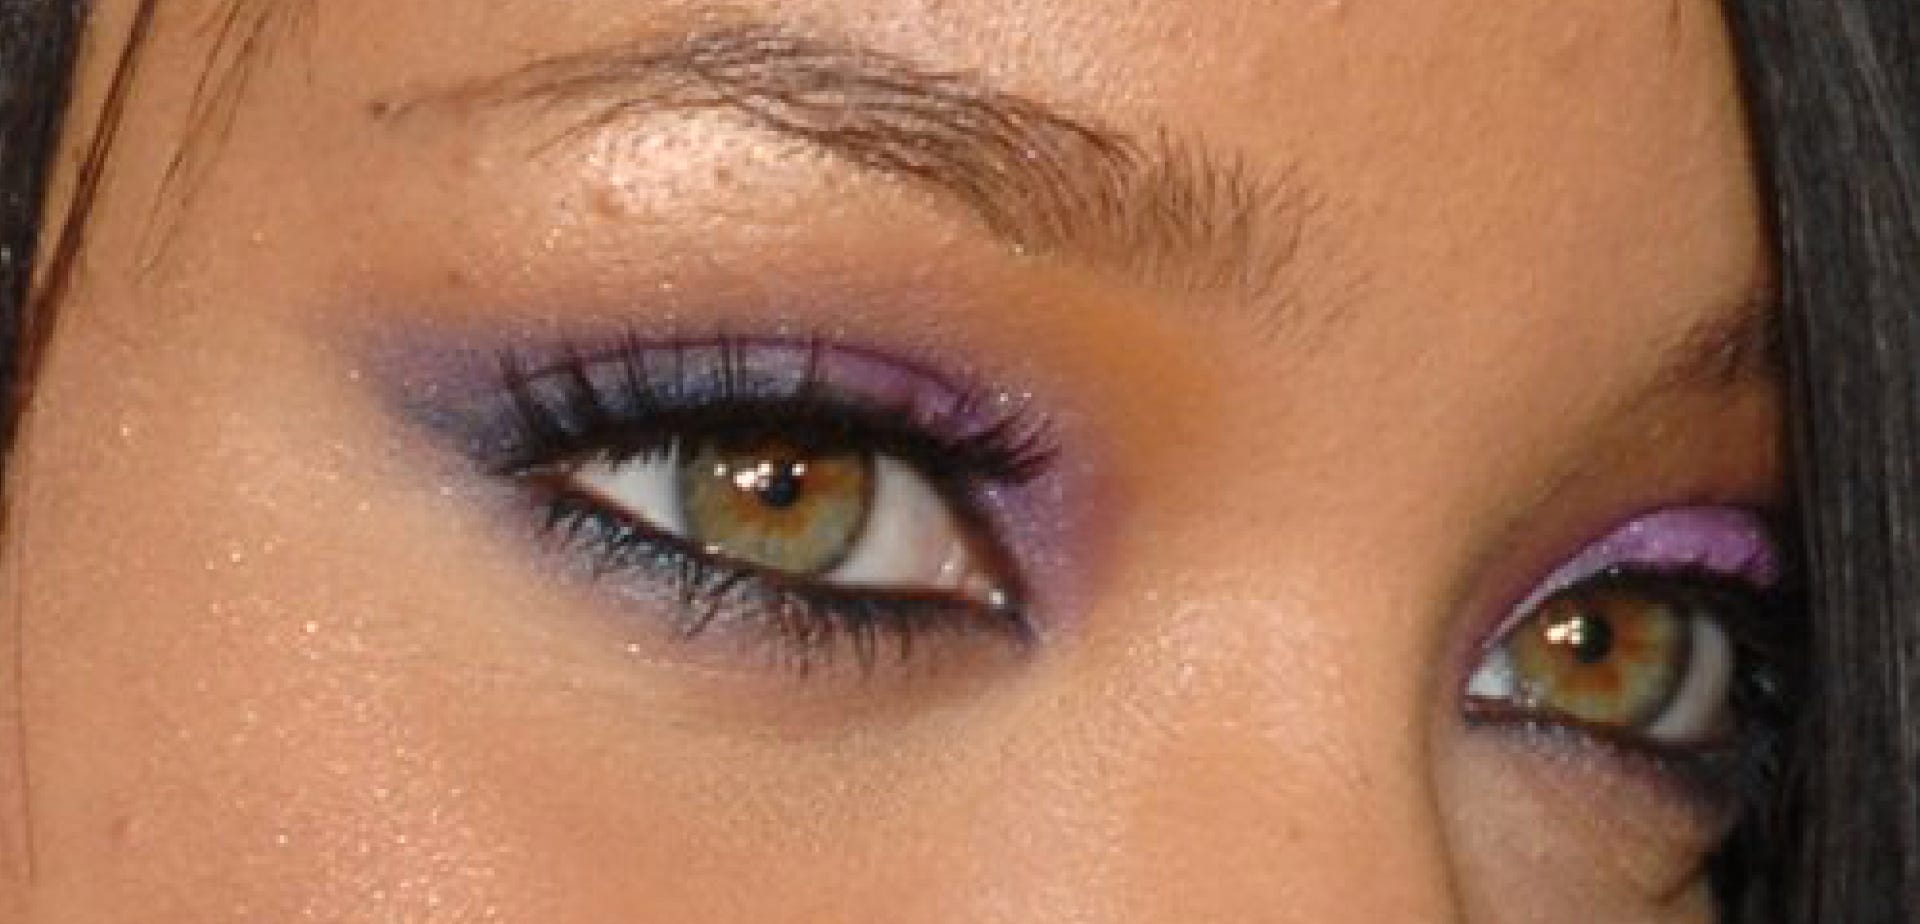 Singer Rihanna's green eye color. are they real, or does she wear colour contacts?